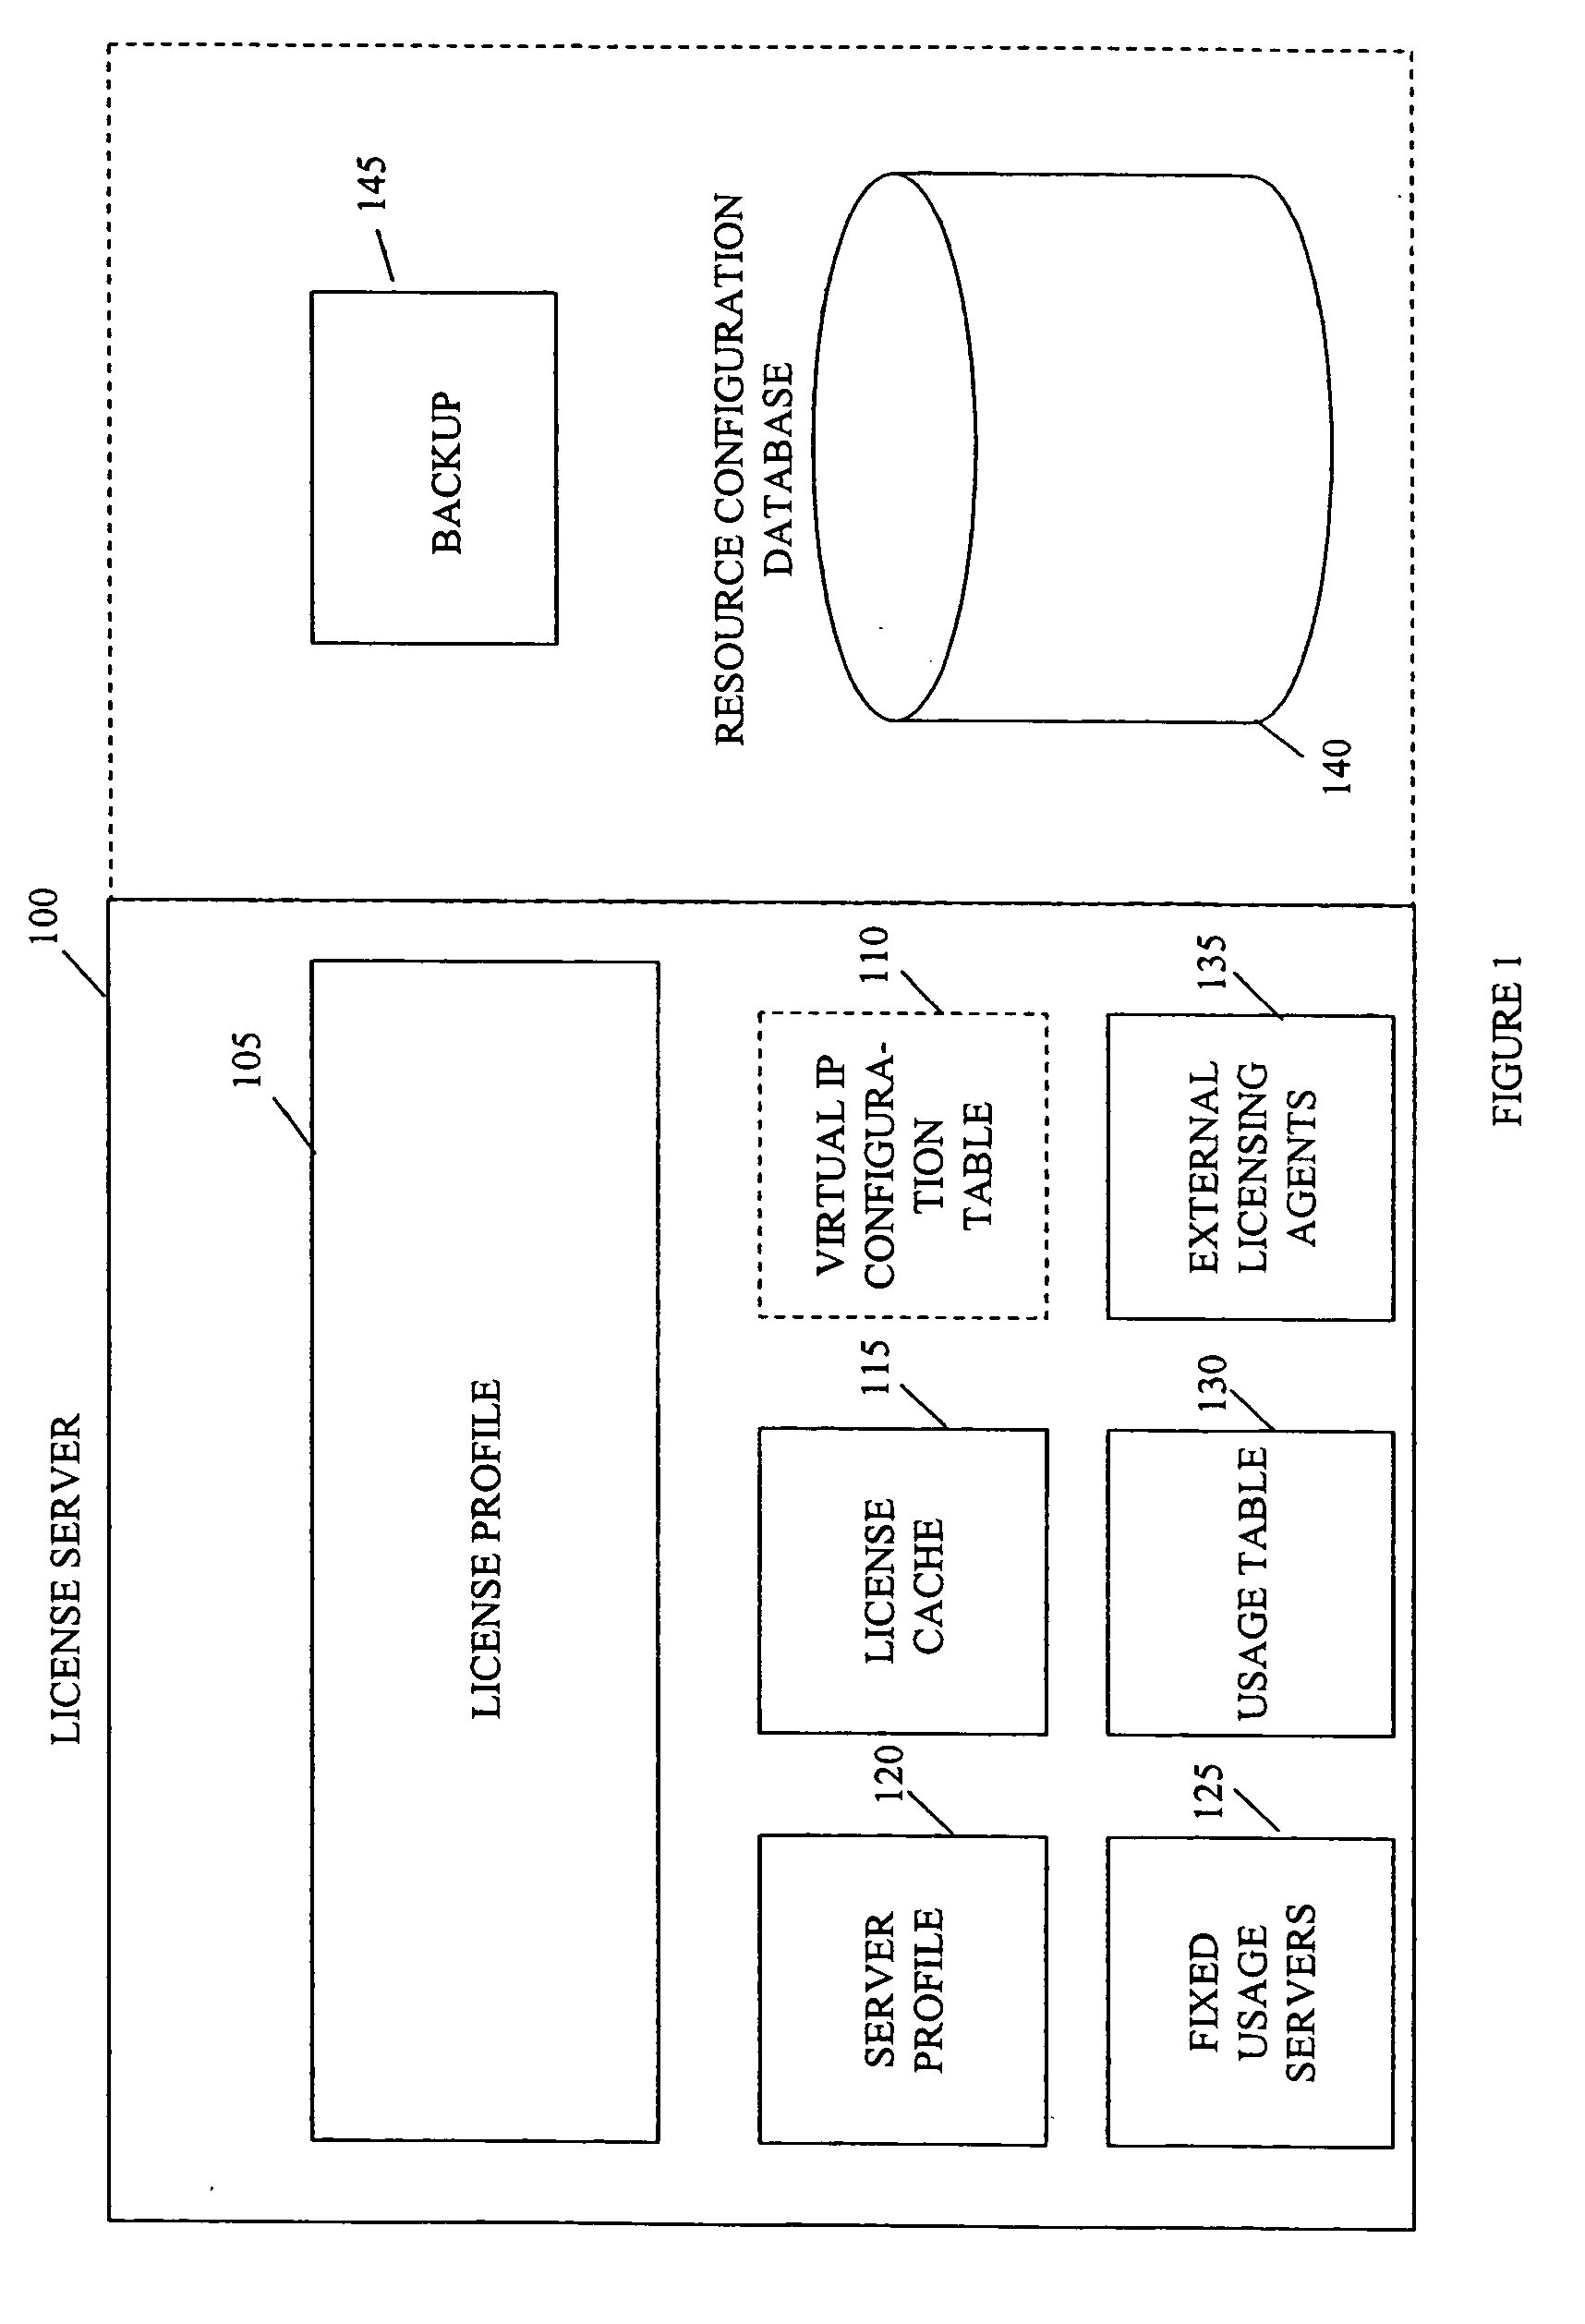 Grid licensing server and fault tolerant grid system and method of use